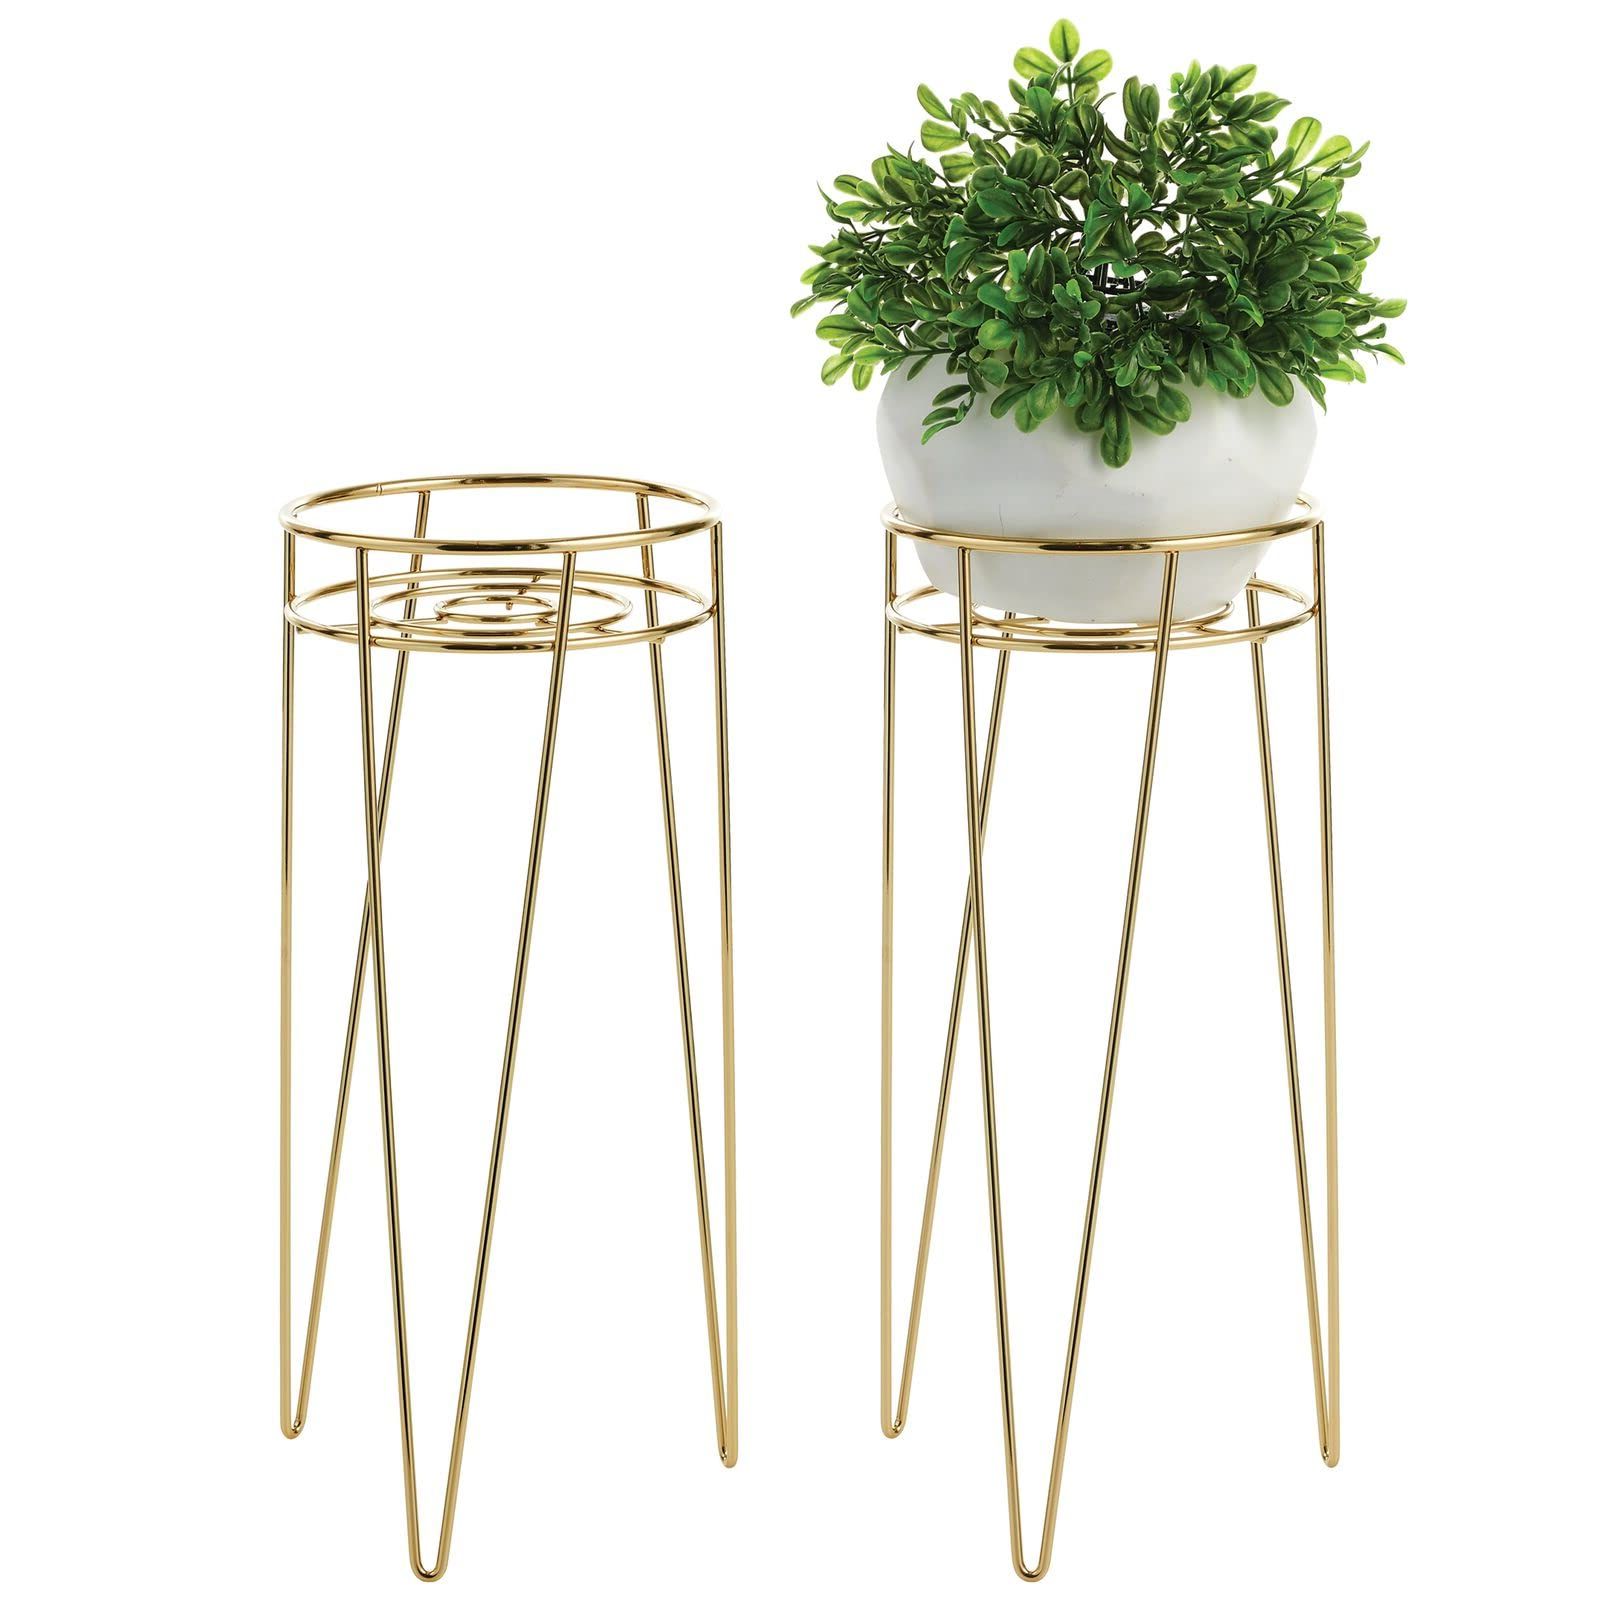 2019 Mdesign Steel Modern 17" Plant Stand Holder With Hairpin Legs – Display  Indoor/outdoor Plants, Flowers, Succulents On Shelf, Balcony, Patio,  Garden, Office, Concerto Collection, 2 Pack, Soft Brass Regarding Brass Plant Stands (View 6 of 10)